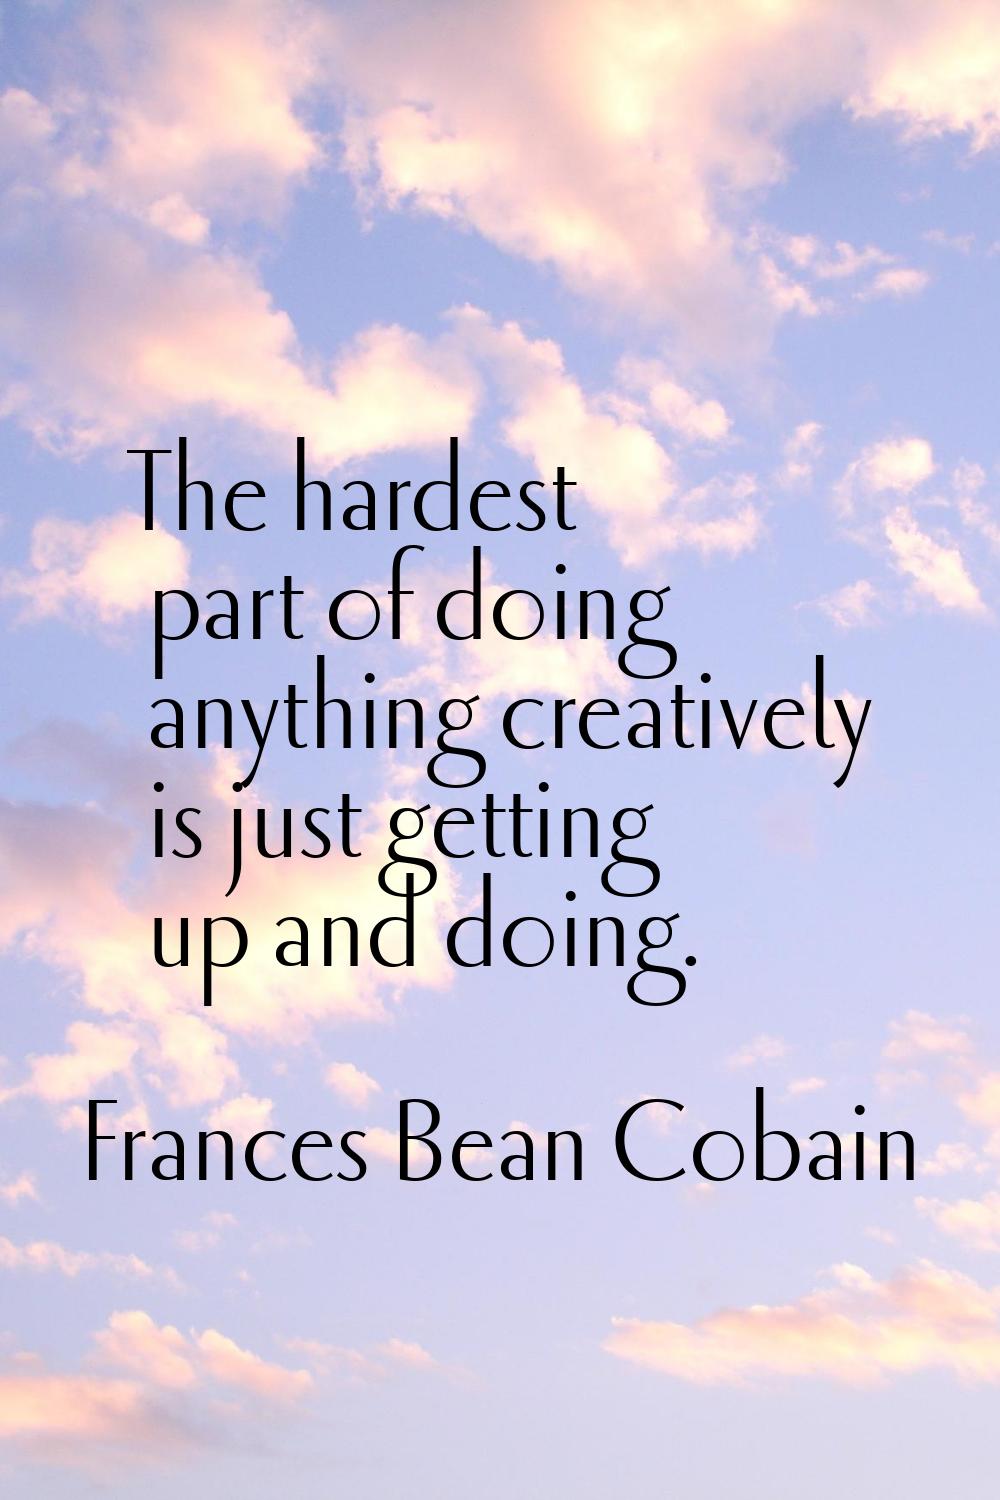 The hardest part of doing anything creatively is just getting up and doing.